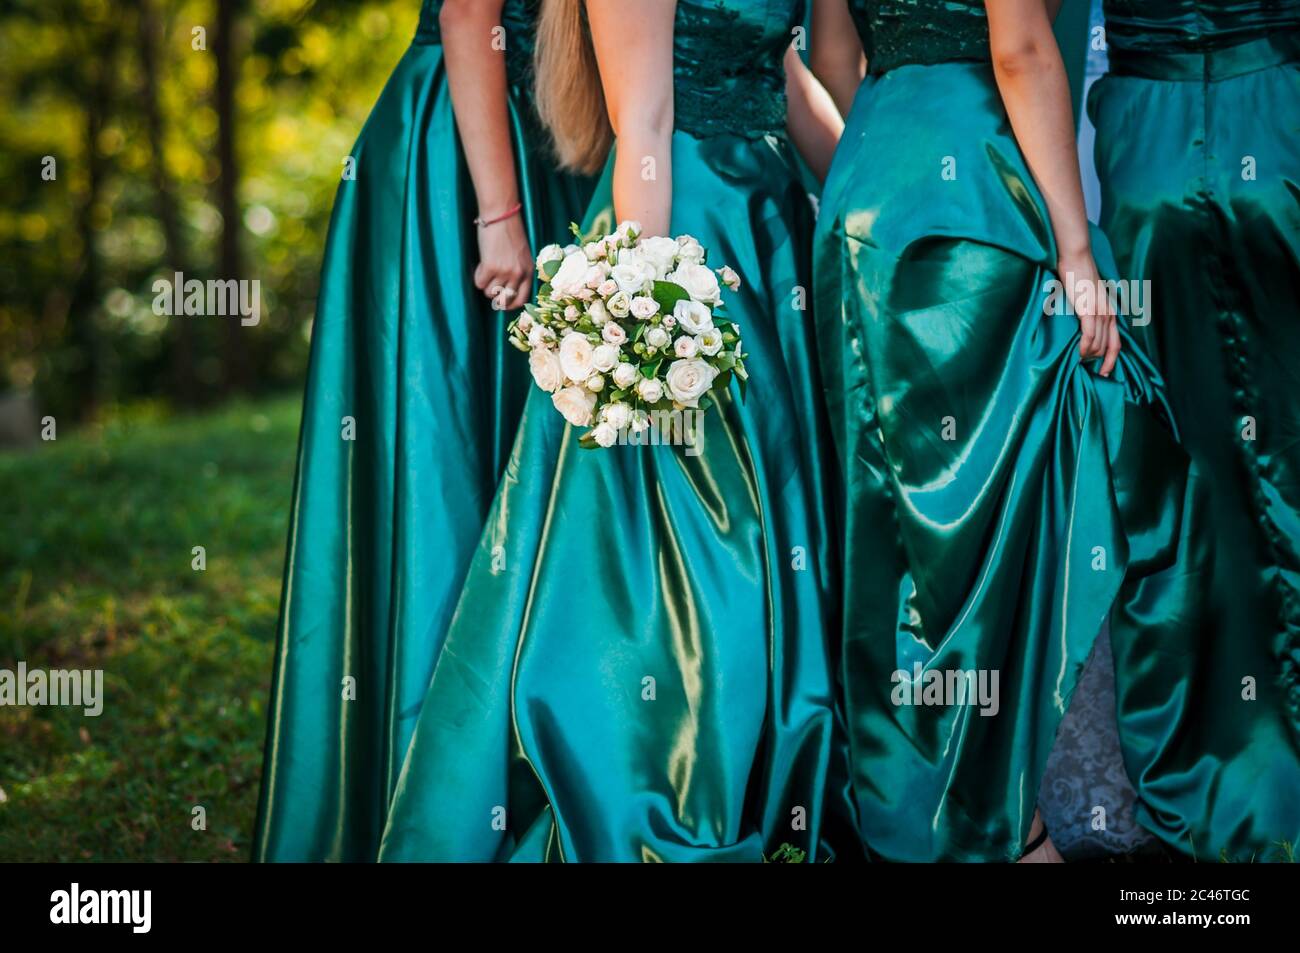 Bouquet of flowers in the hand of bridesmaid Stock Photo